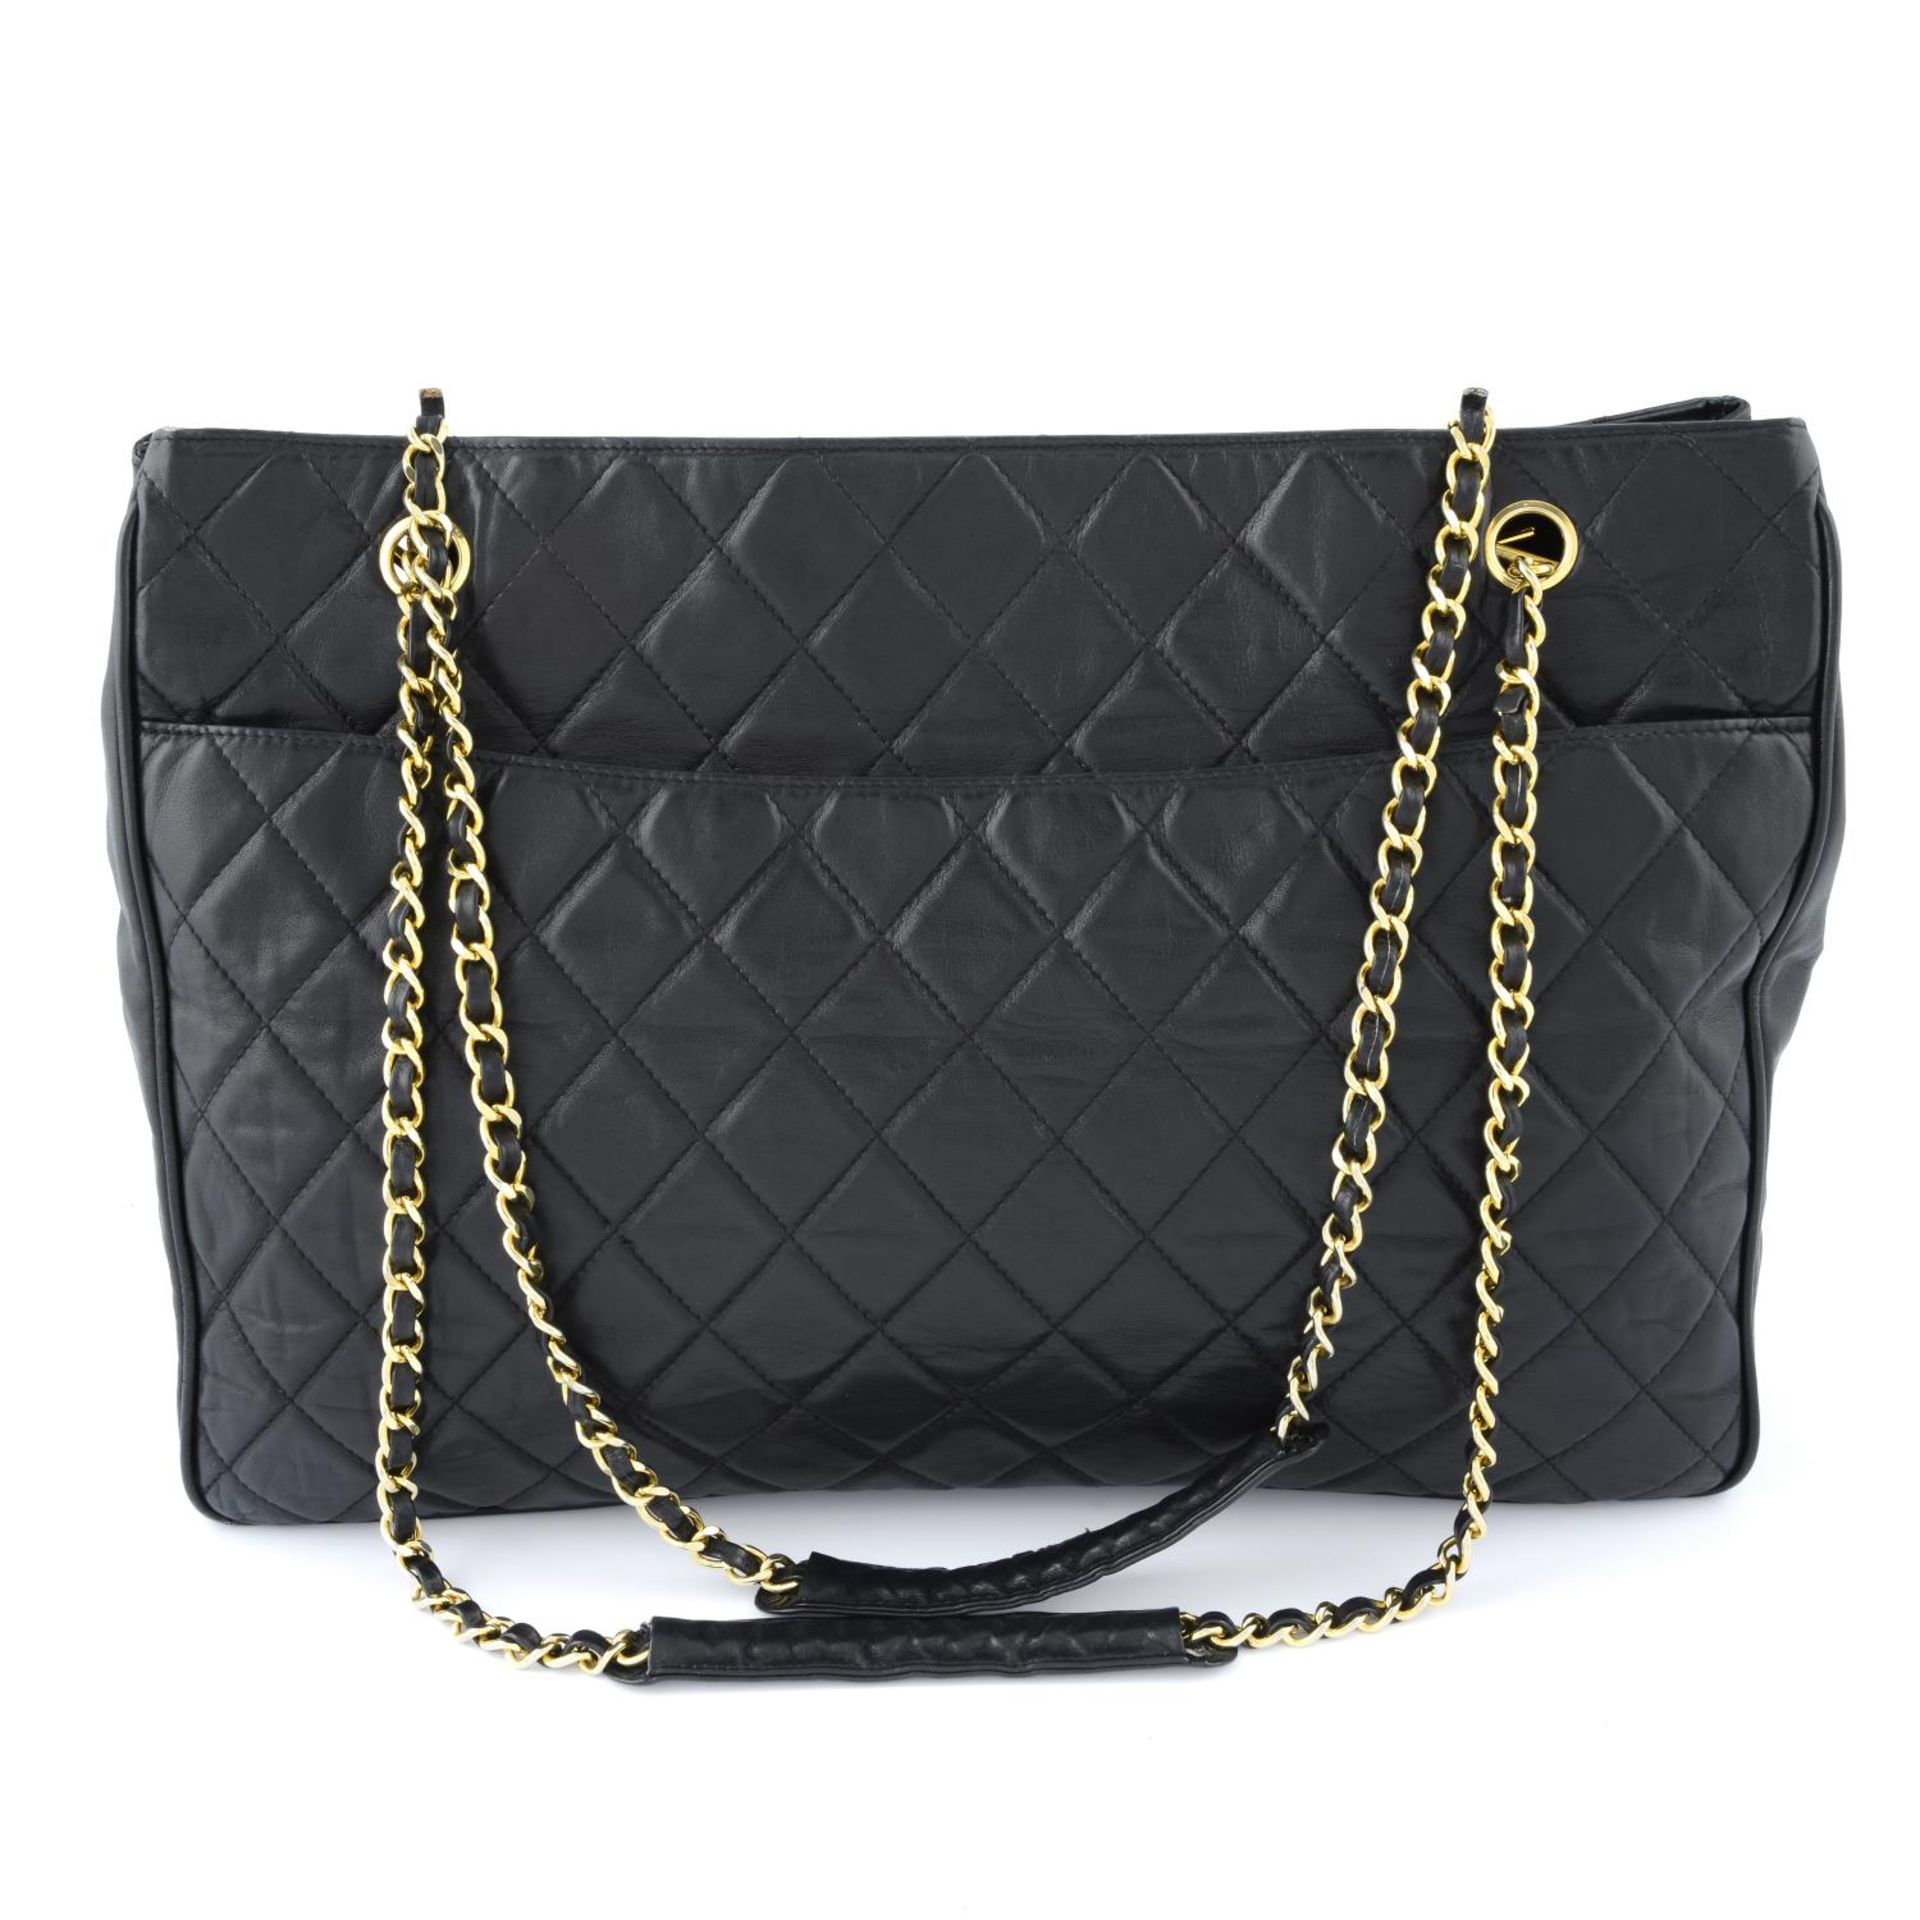 CHANEL - a quilted tote handbag. - Image 2 of 5